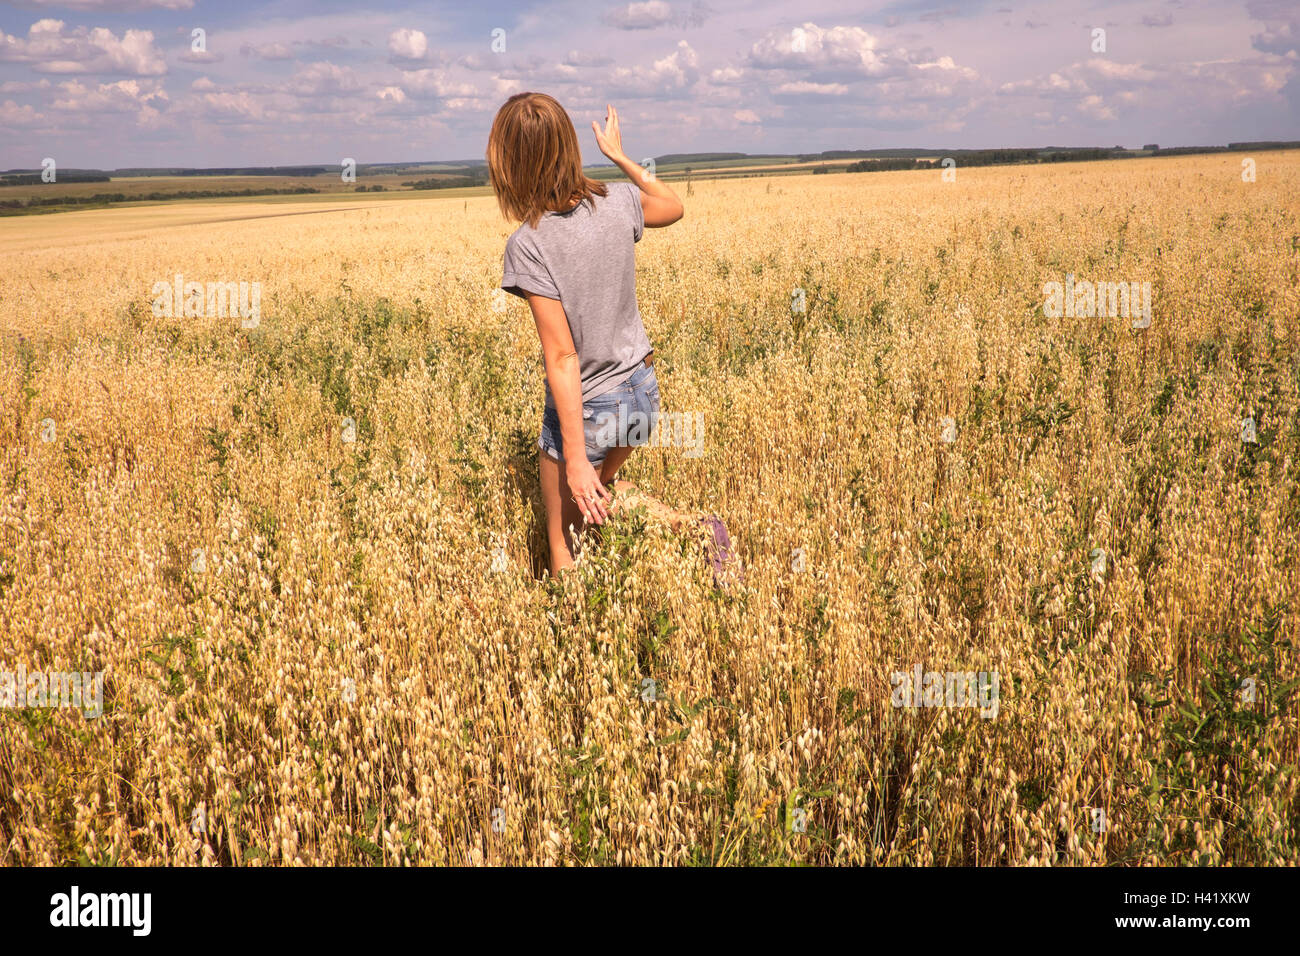 Caucasian woman walking in field Banque D'Images